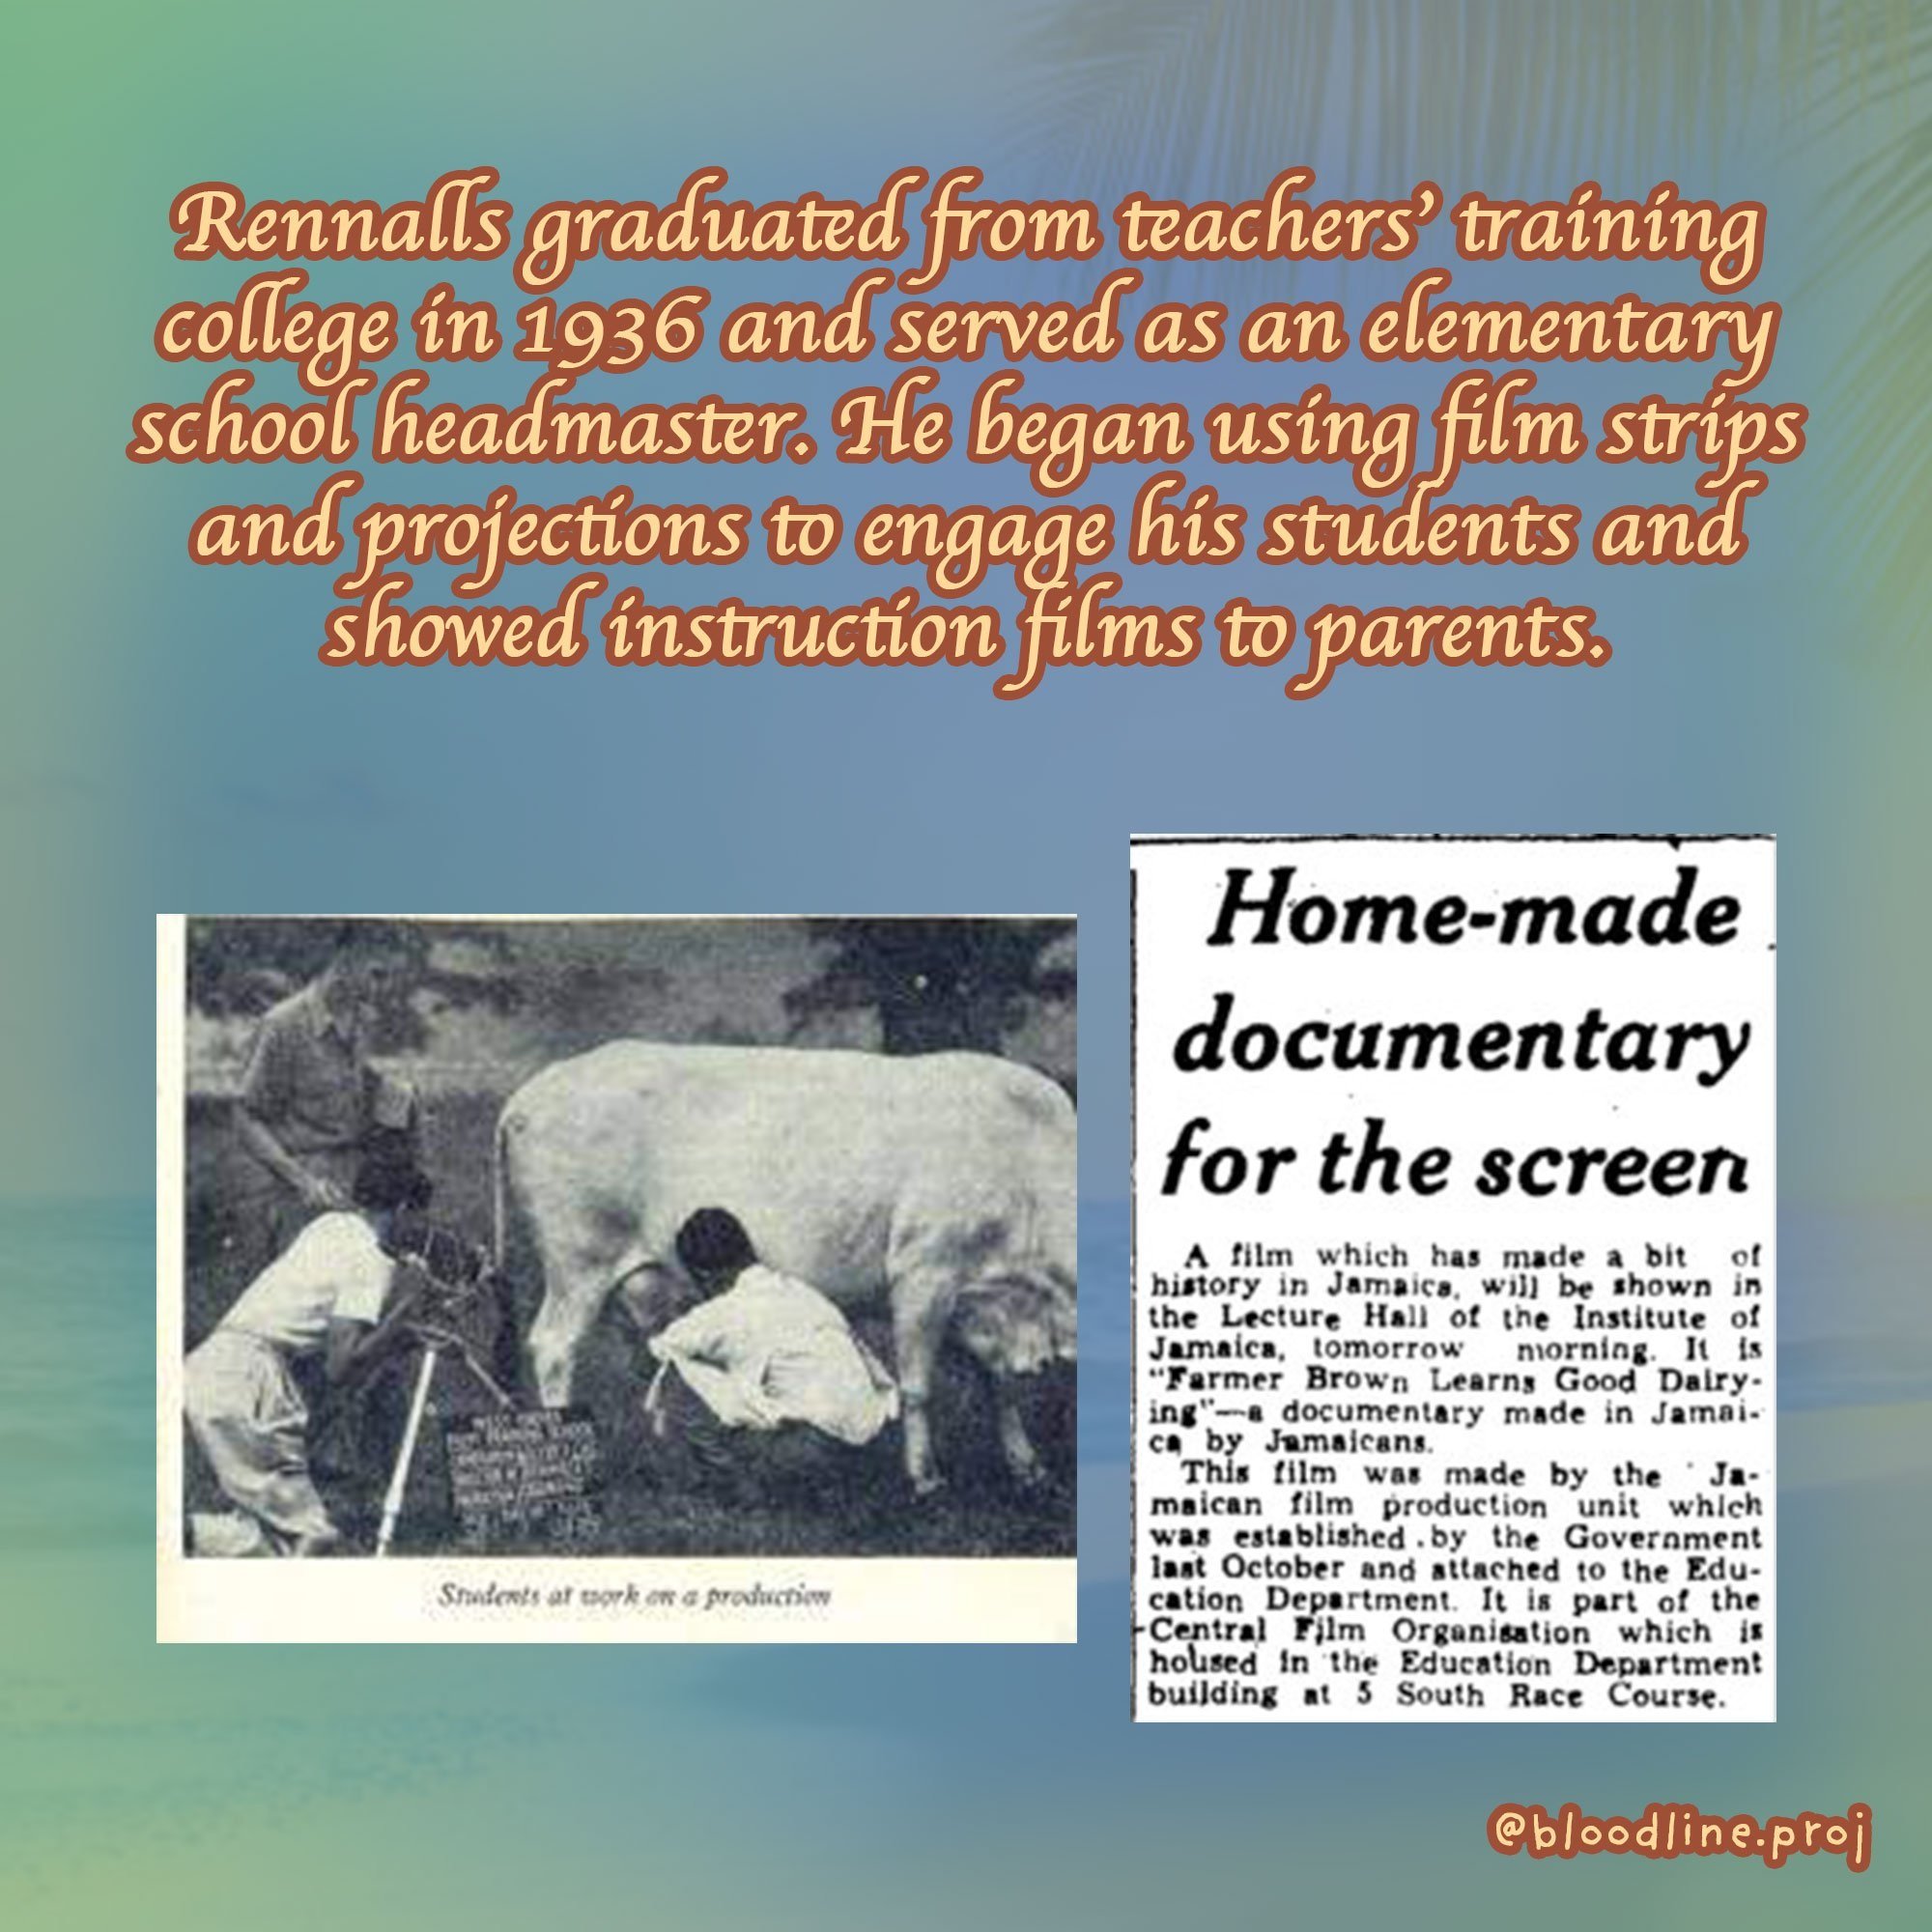  Rennalls graduated from teachers’ training college in 1936 and served as an elementary school headmaster. He began using film strips and projections to engage his students and showed instruction films to parents. 